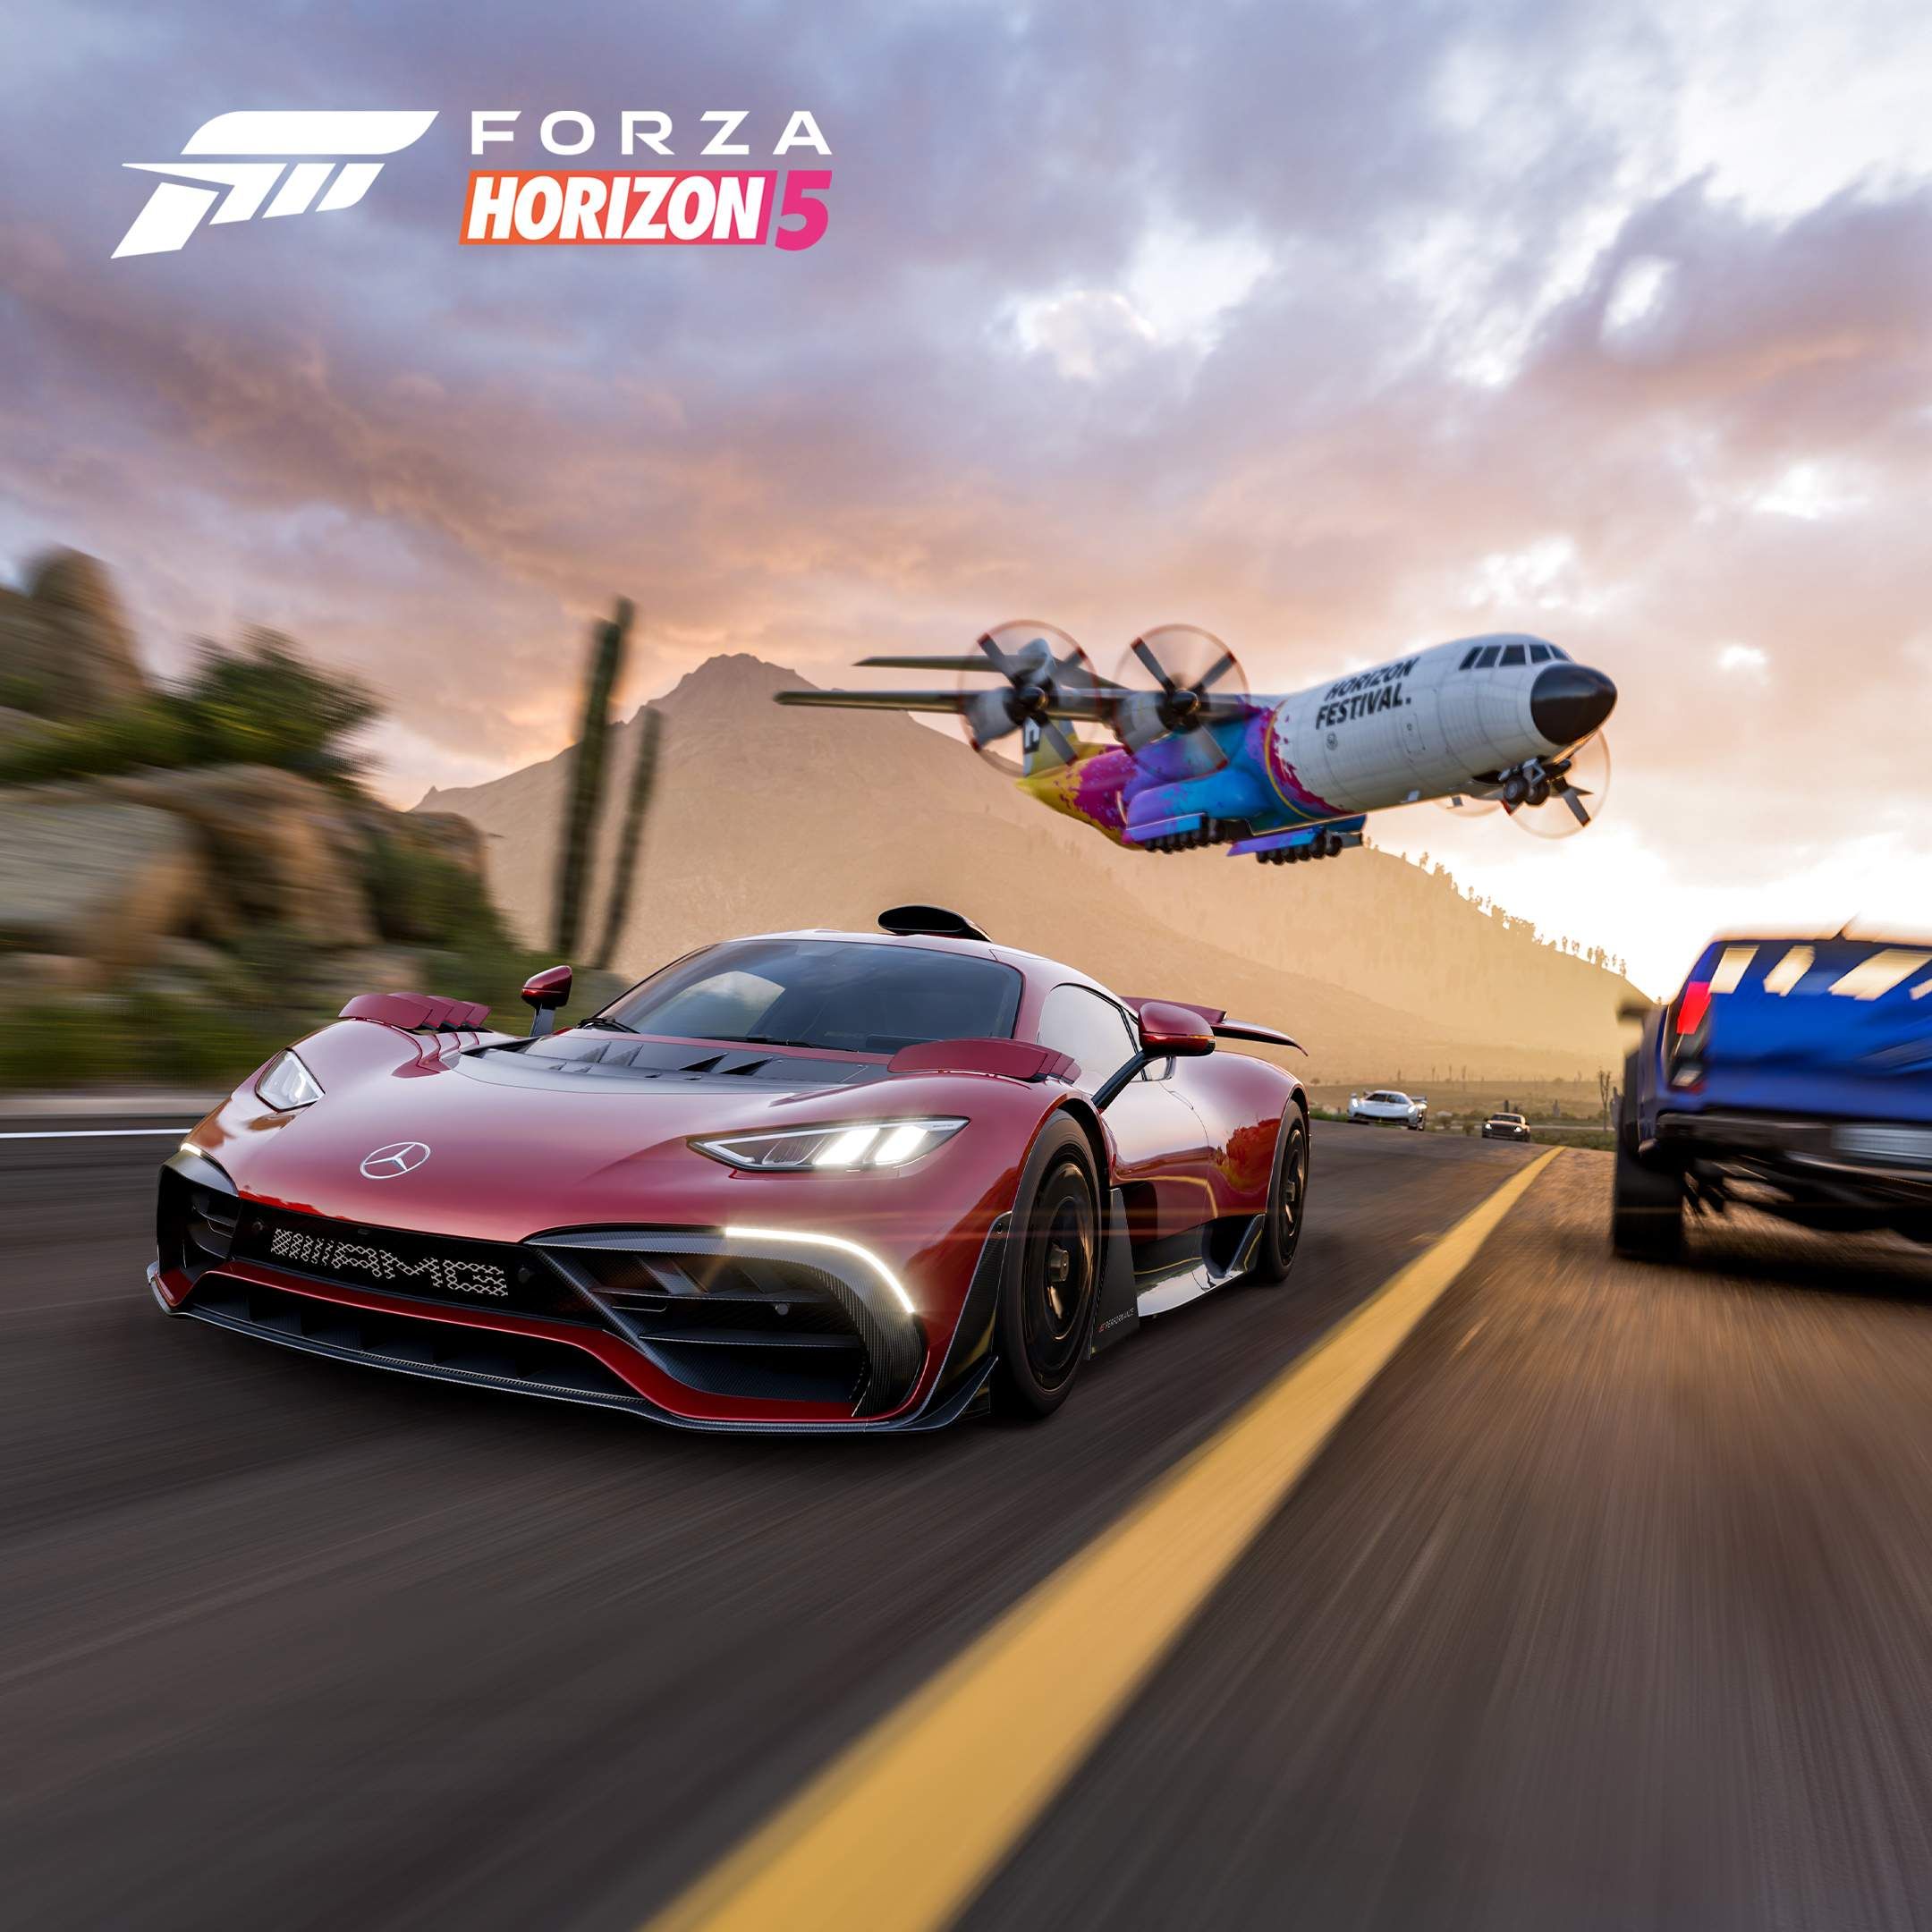 Forza Motorsport Review: A car game for car people